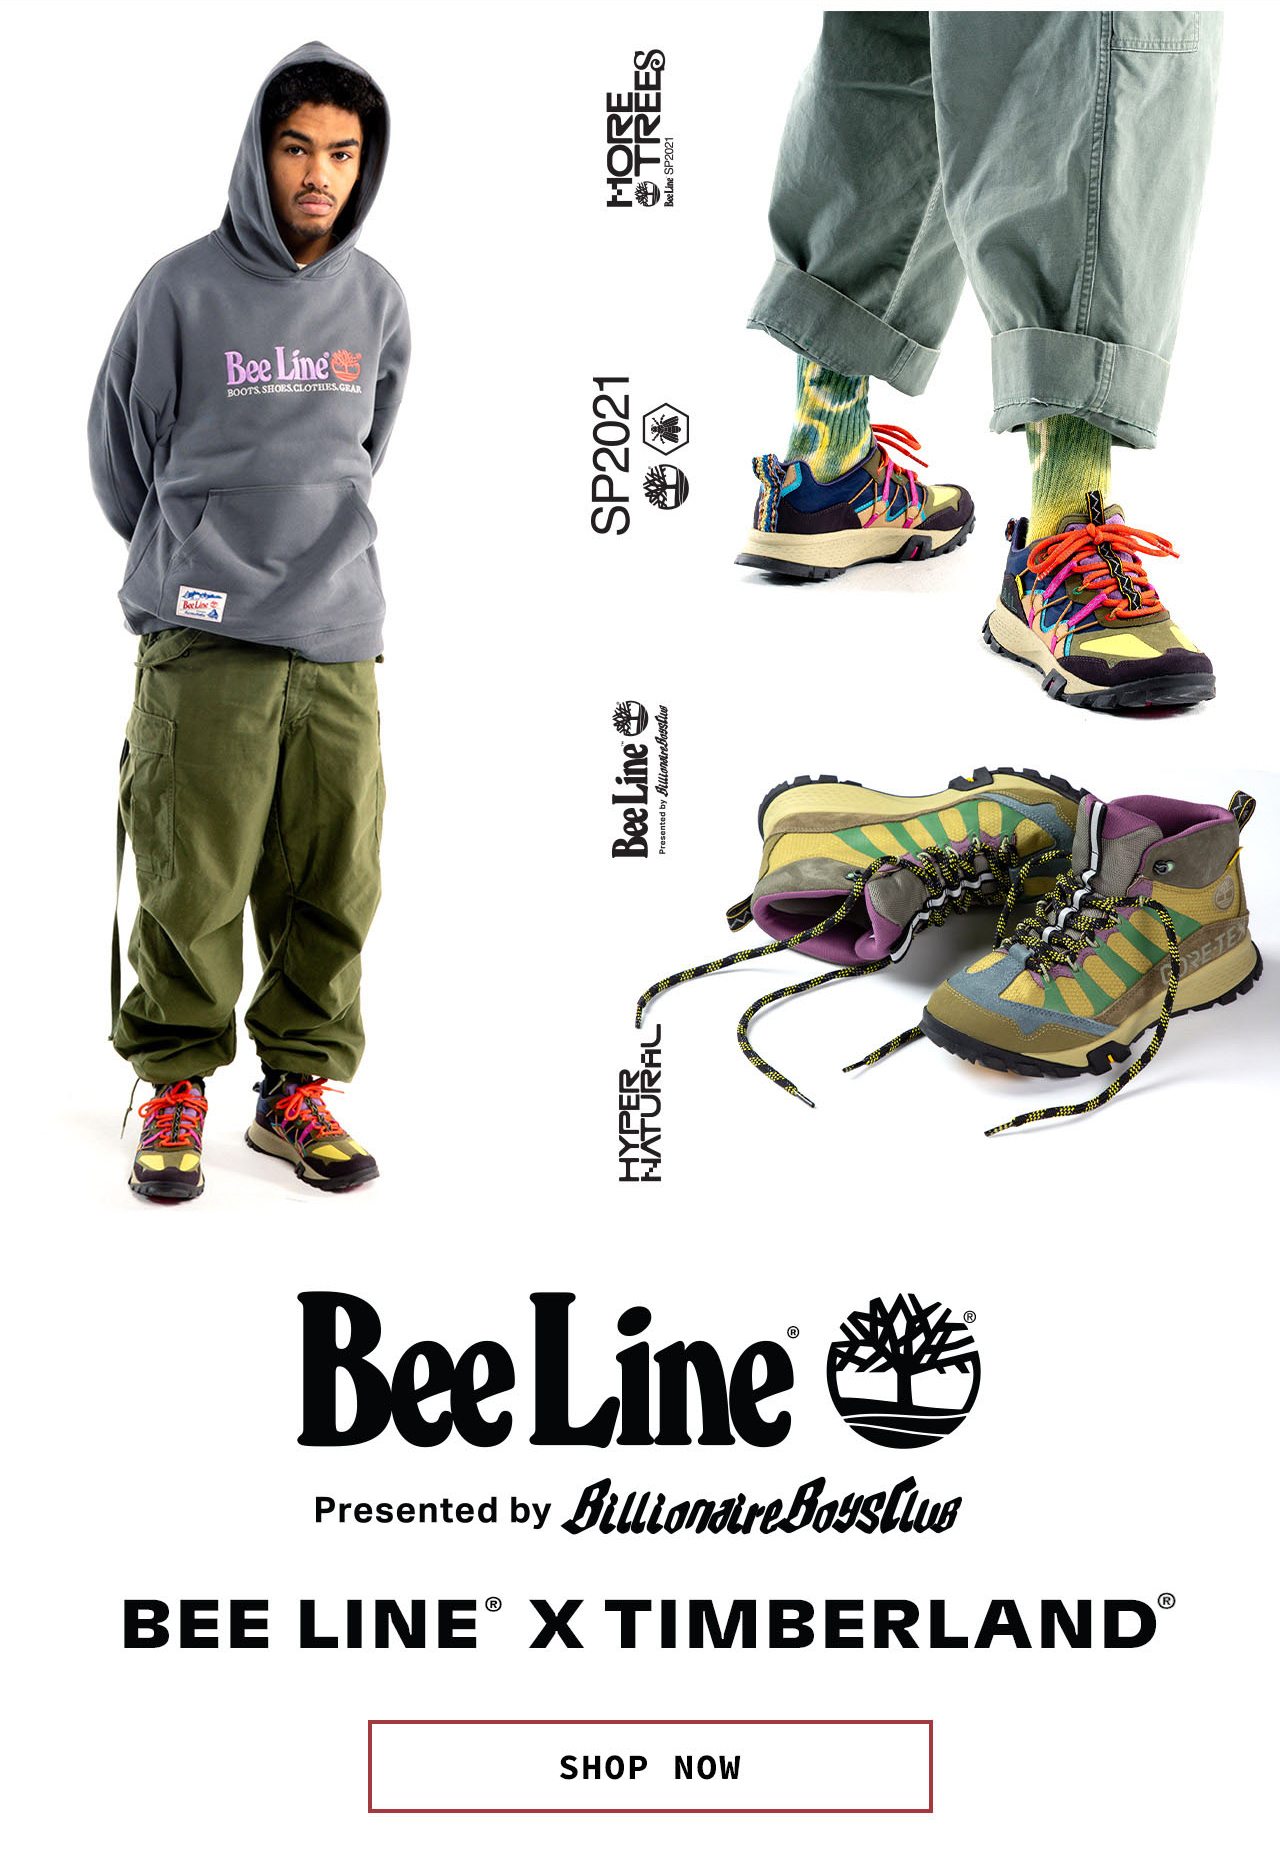 BEE LINE X TIMBERLAND. SHOP NOW.